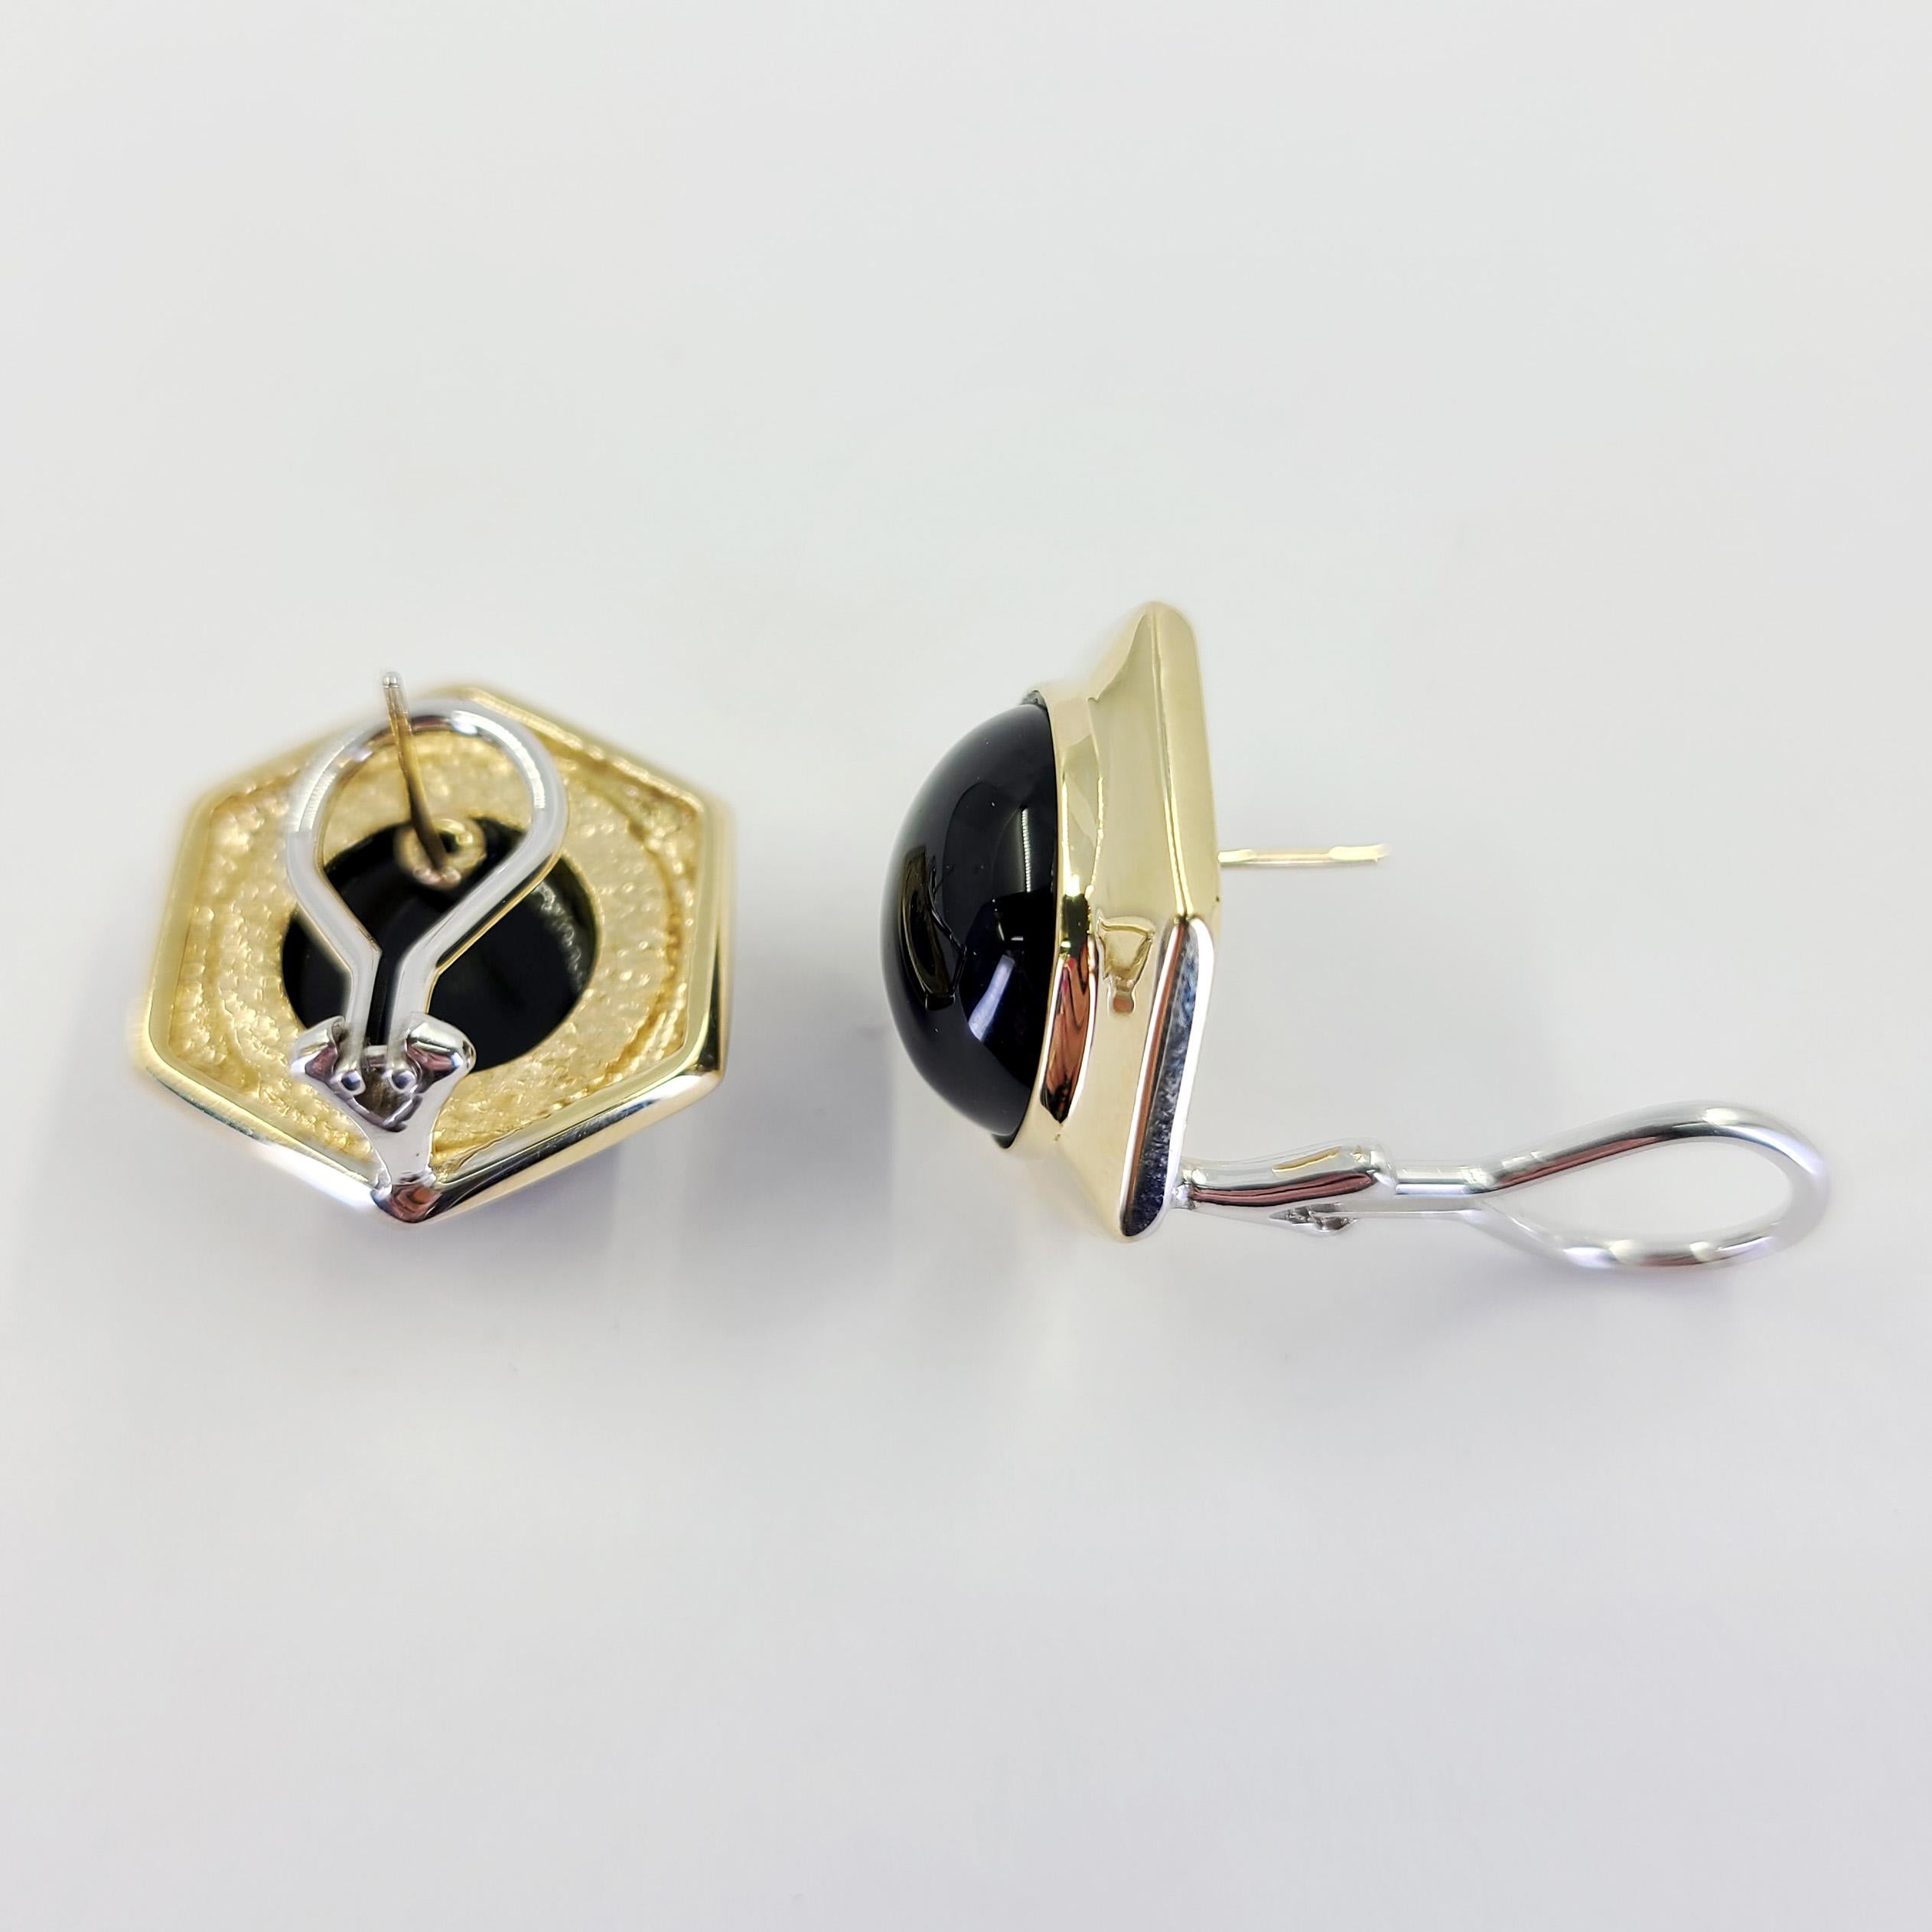 14 Karat Yellow Gold Hexagonal Earrings Featuring 2 Bezel Set 14mm Round Cabochon Onyx. Pierced Post With 14 Karat White Gold Omega Clip Back. Finished Weight Is 14.5 Grams.